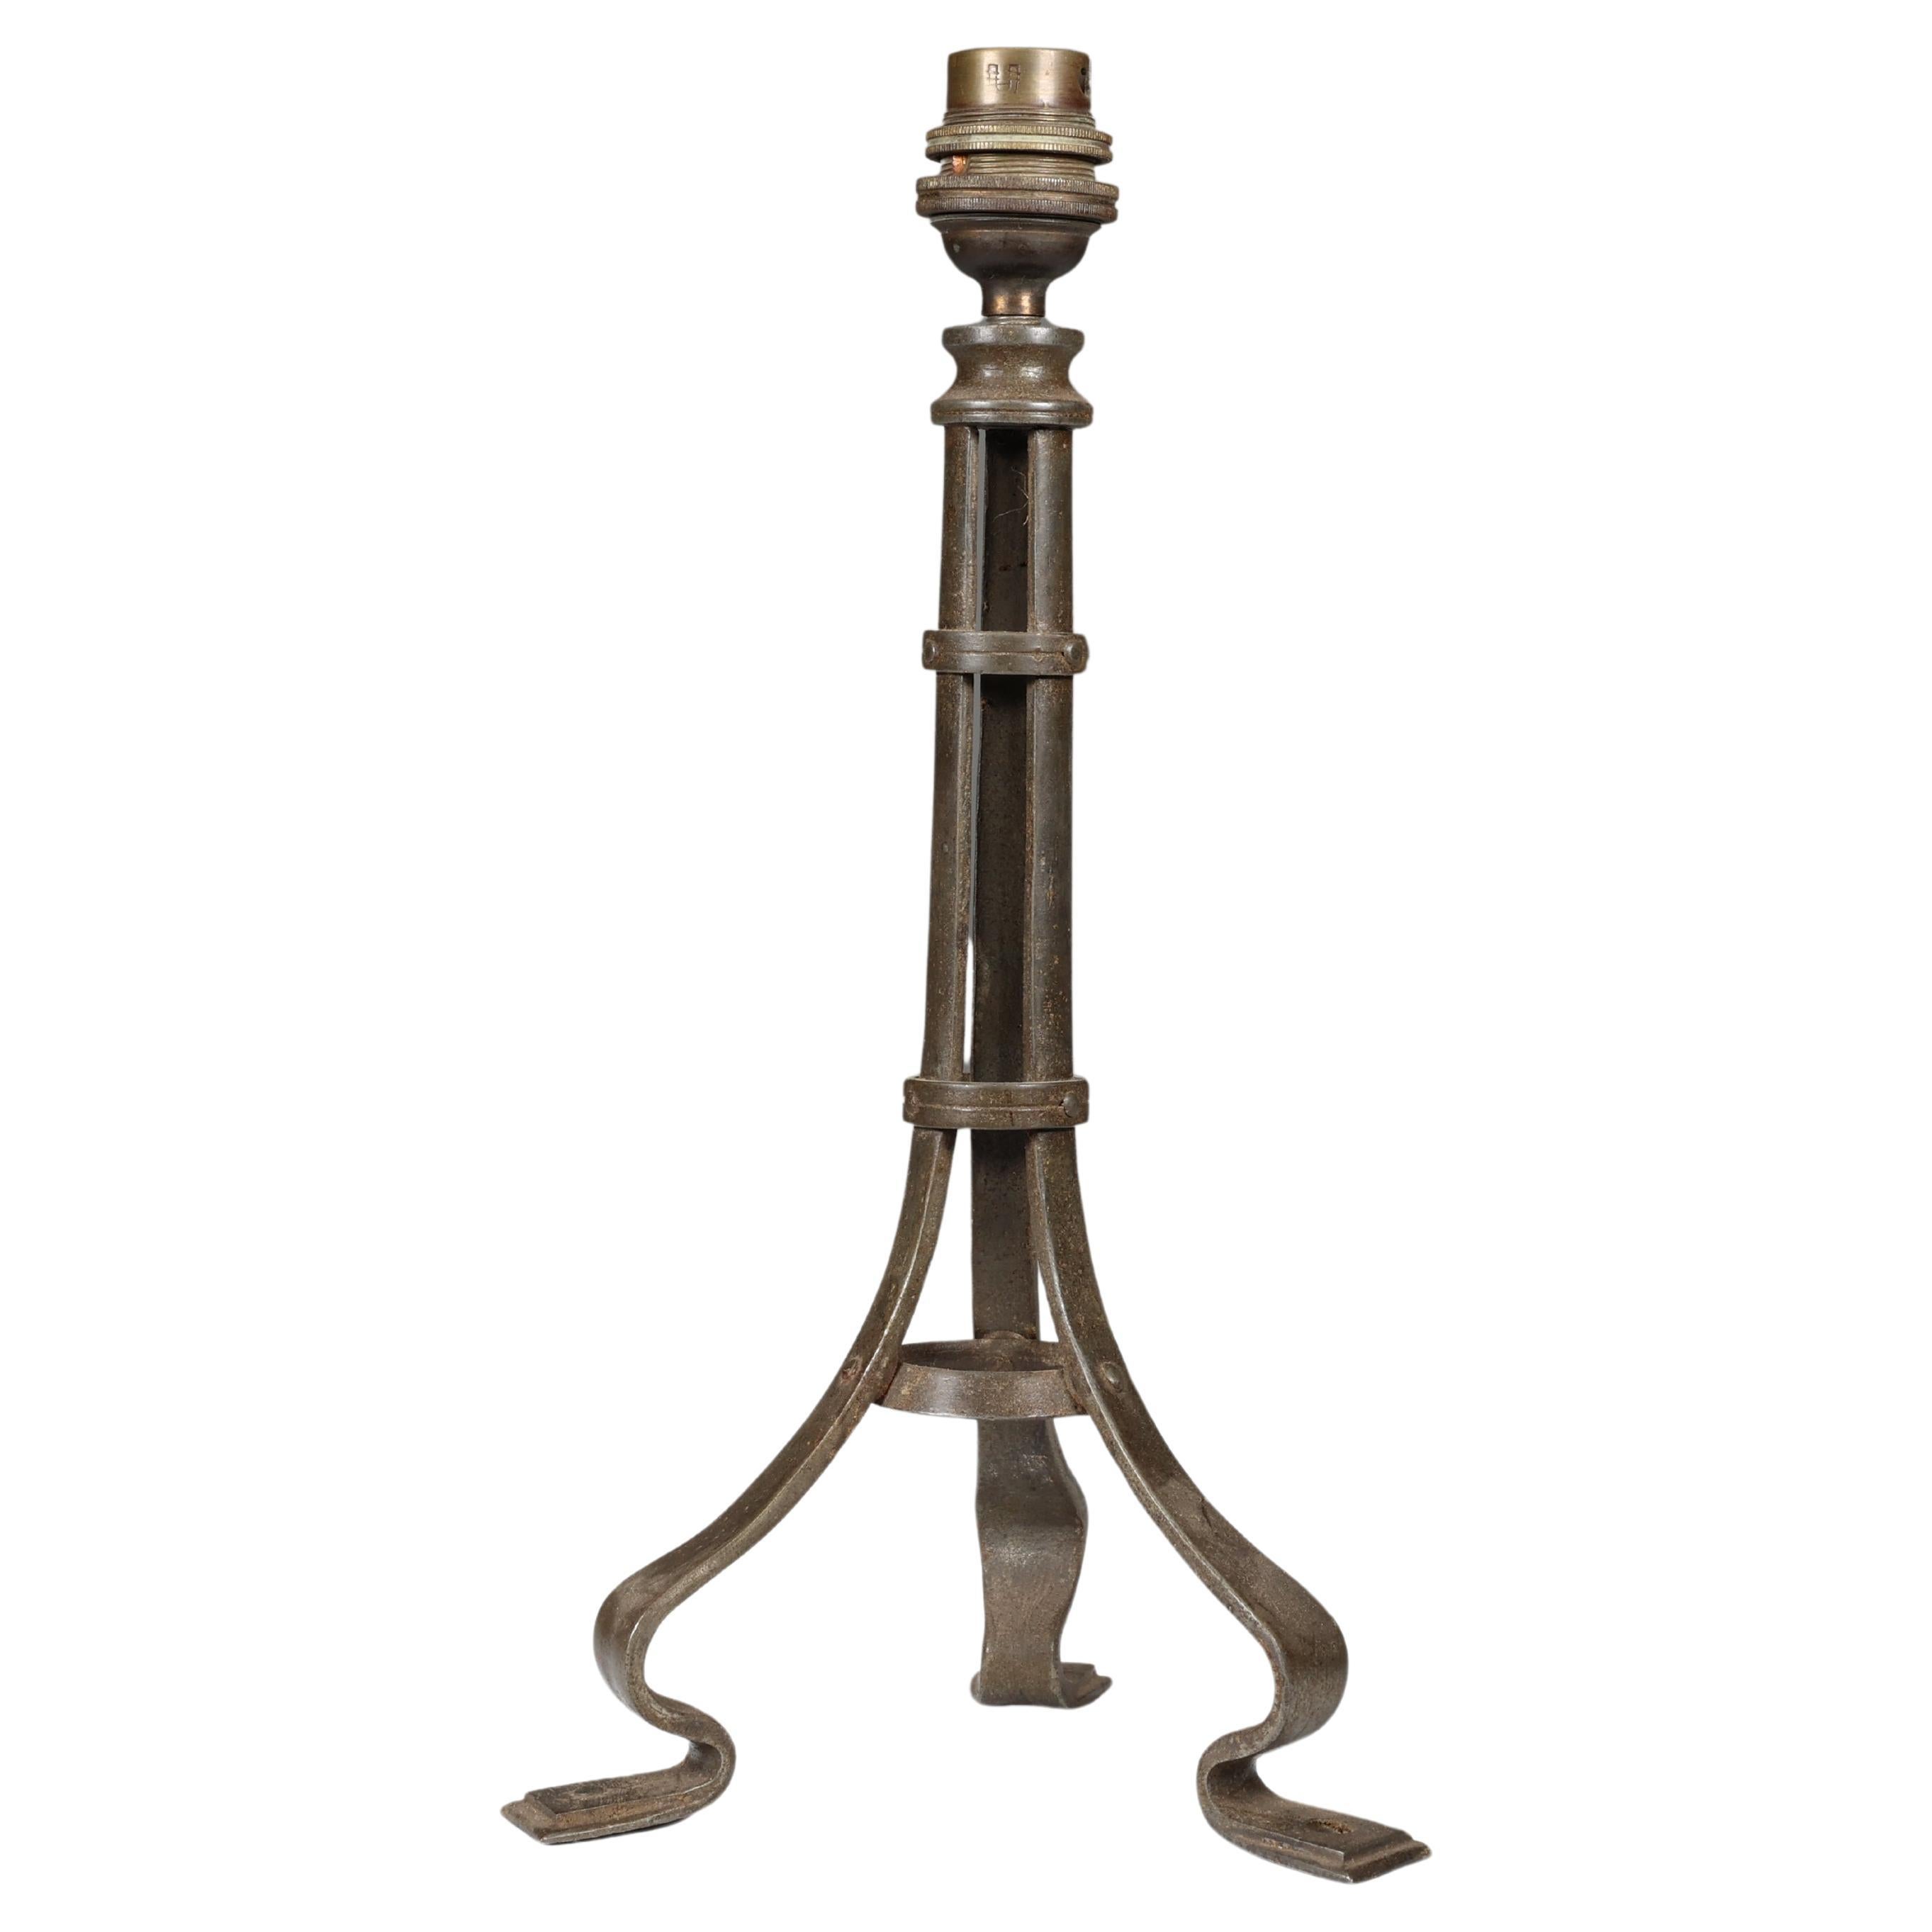 Birmingham Guild of Handicraft attributed. An Arts and Crafts iron table lamp.